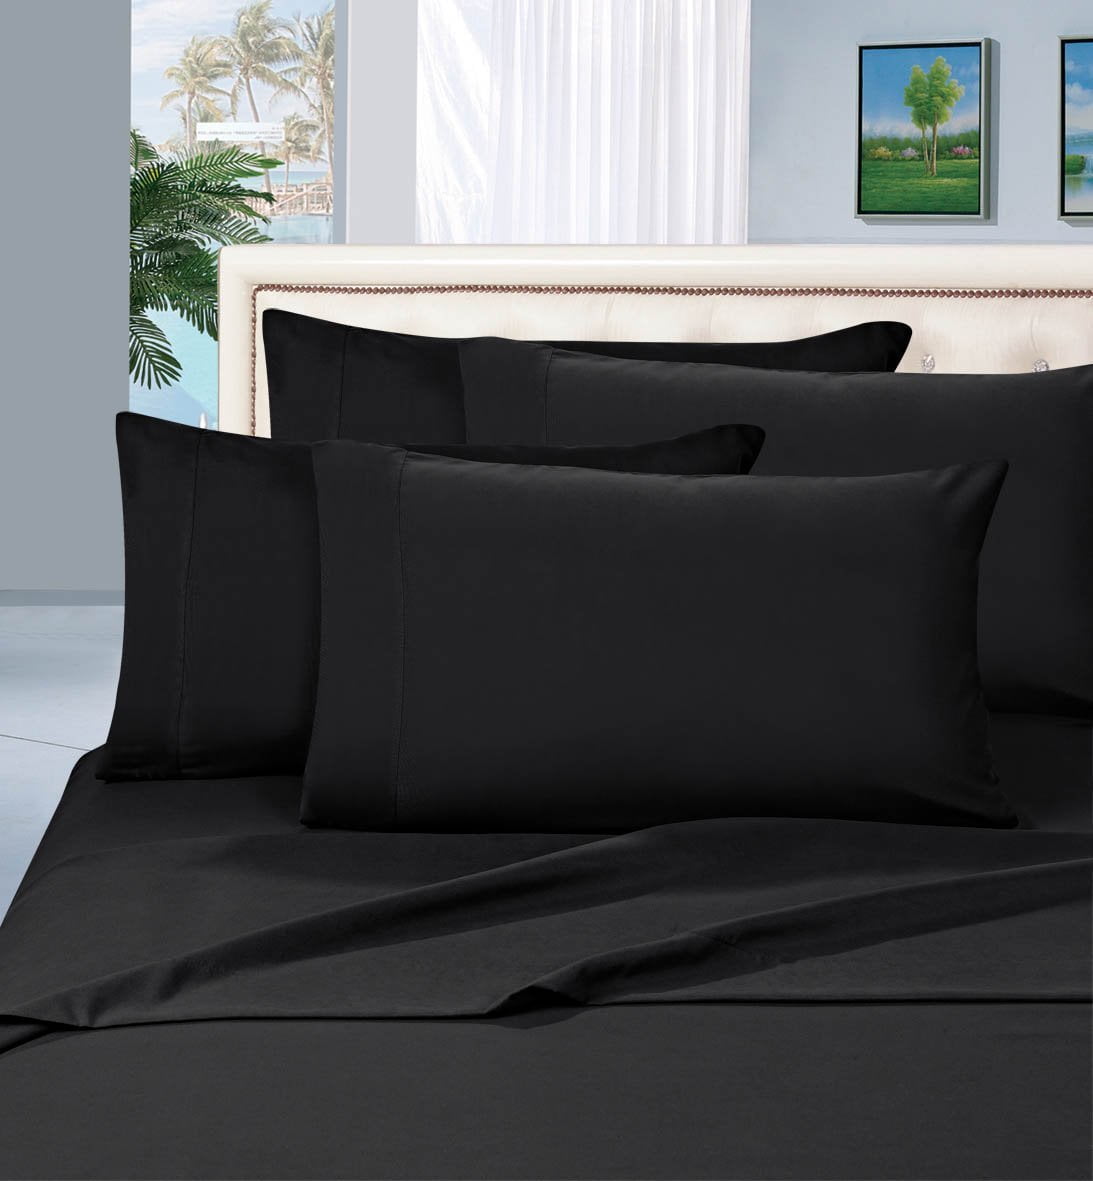 Wrinkle Free 4 Piece Bed Sheet Set, Bed Sheets King Size Dimensions